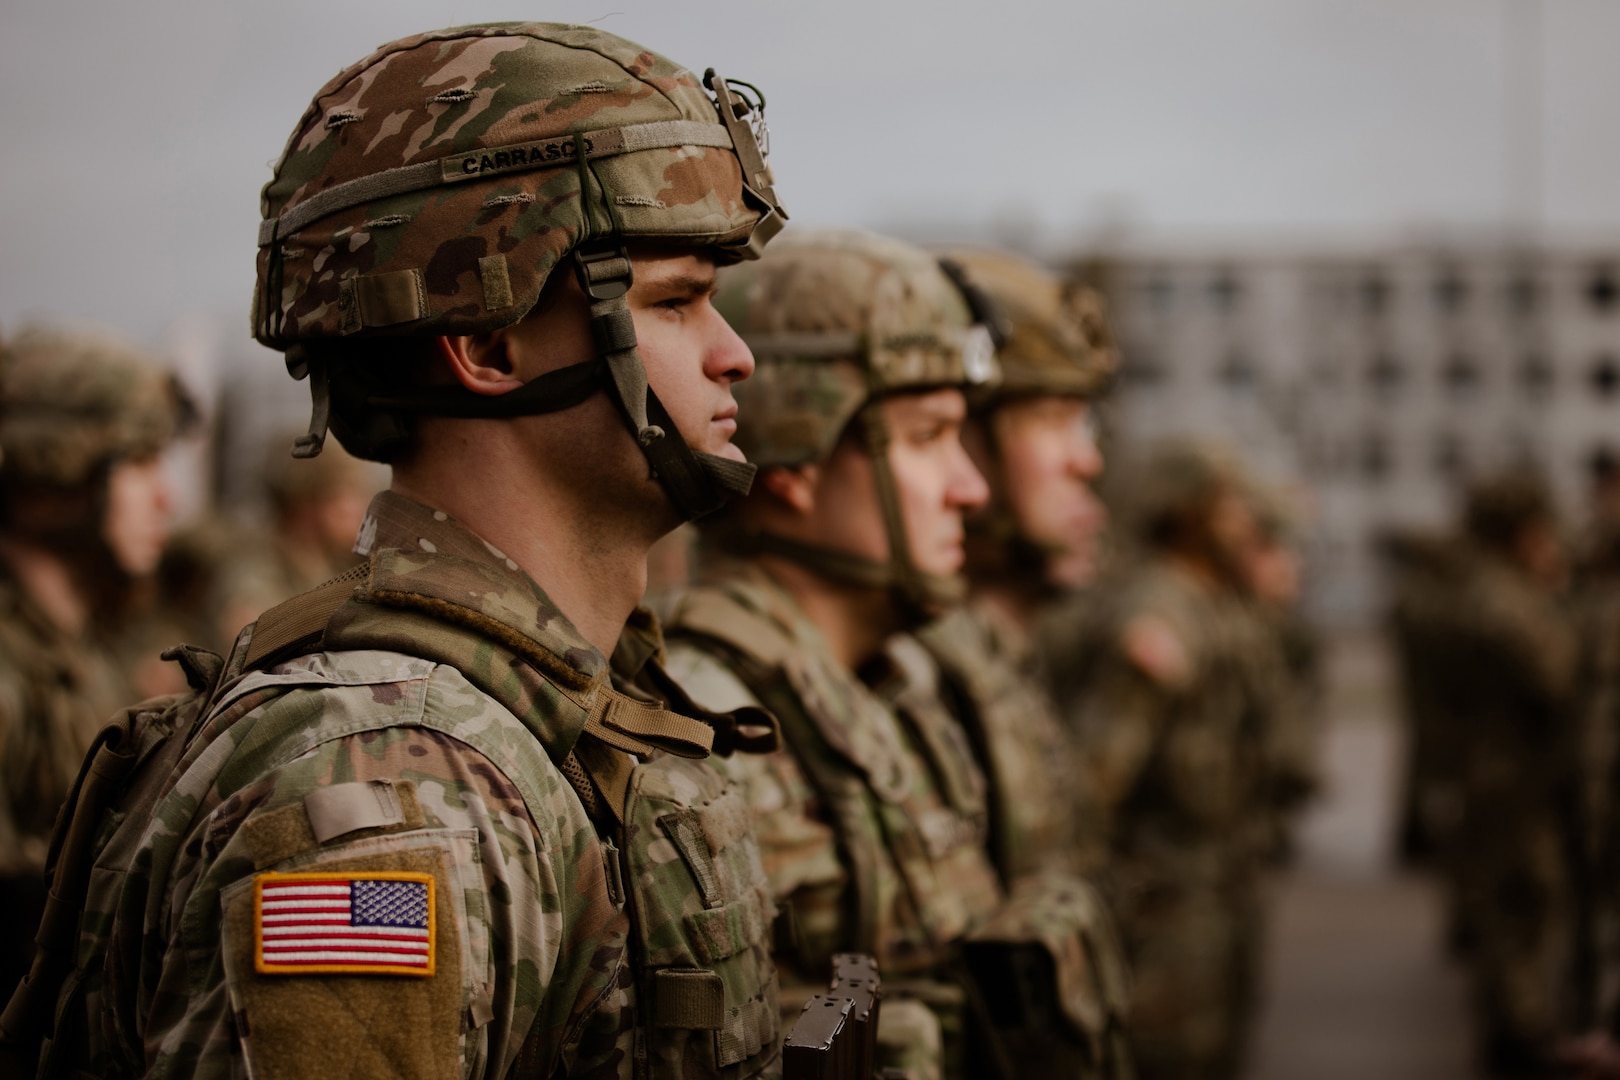 U.S. Army National Guard Soldiers assigned to 3rd Battalion, 161st Infantry Regiment, stand in formation during a handover/takeover ceremony at Bemowo Piskie Training Area, Poland, Feb. 11, 2022. The ceremony demonstrated NATO's continued commitment to the collective defense and security of our allies on NATO's eastern flank.